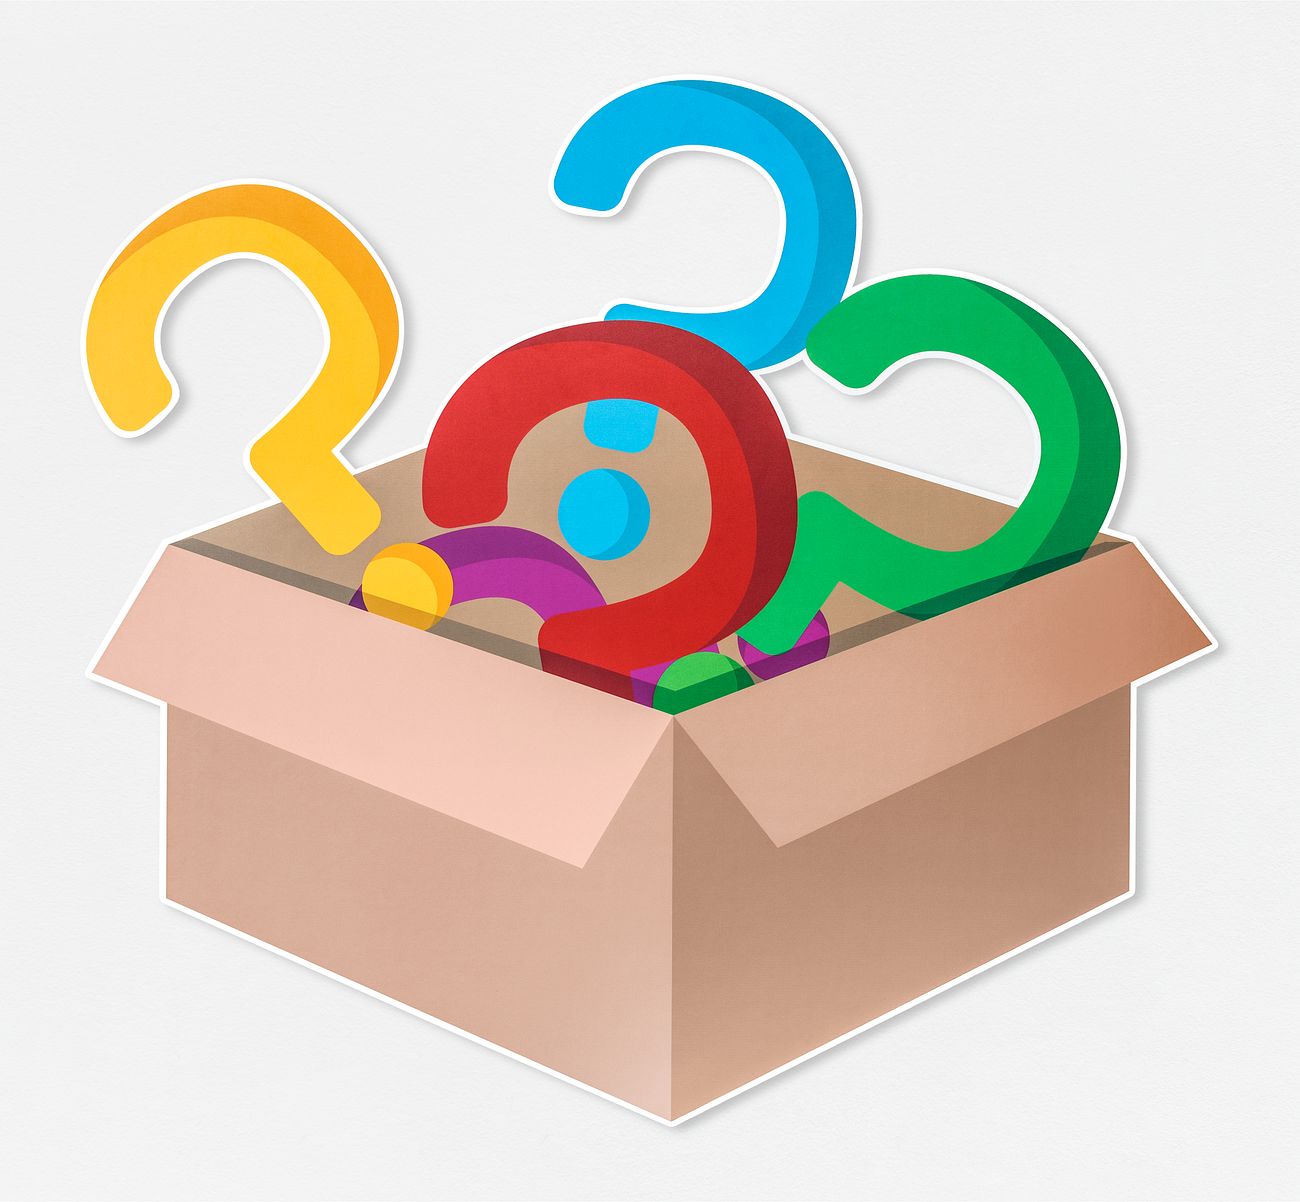 Download Colorful question mark icons in an open box | Royalty free psd mockup - 514585